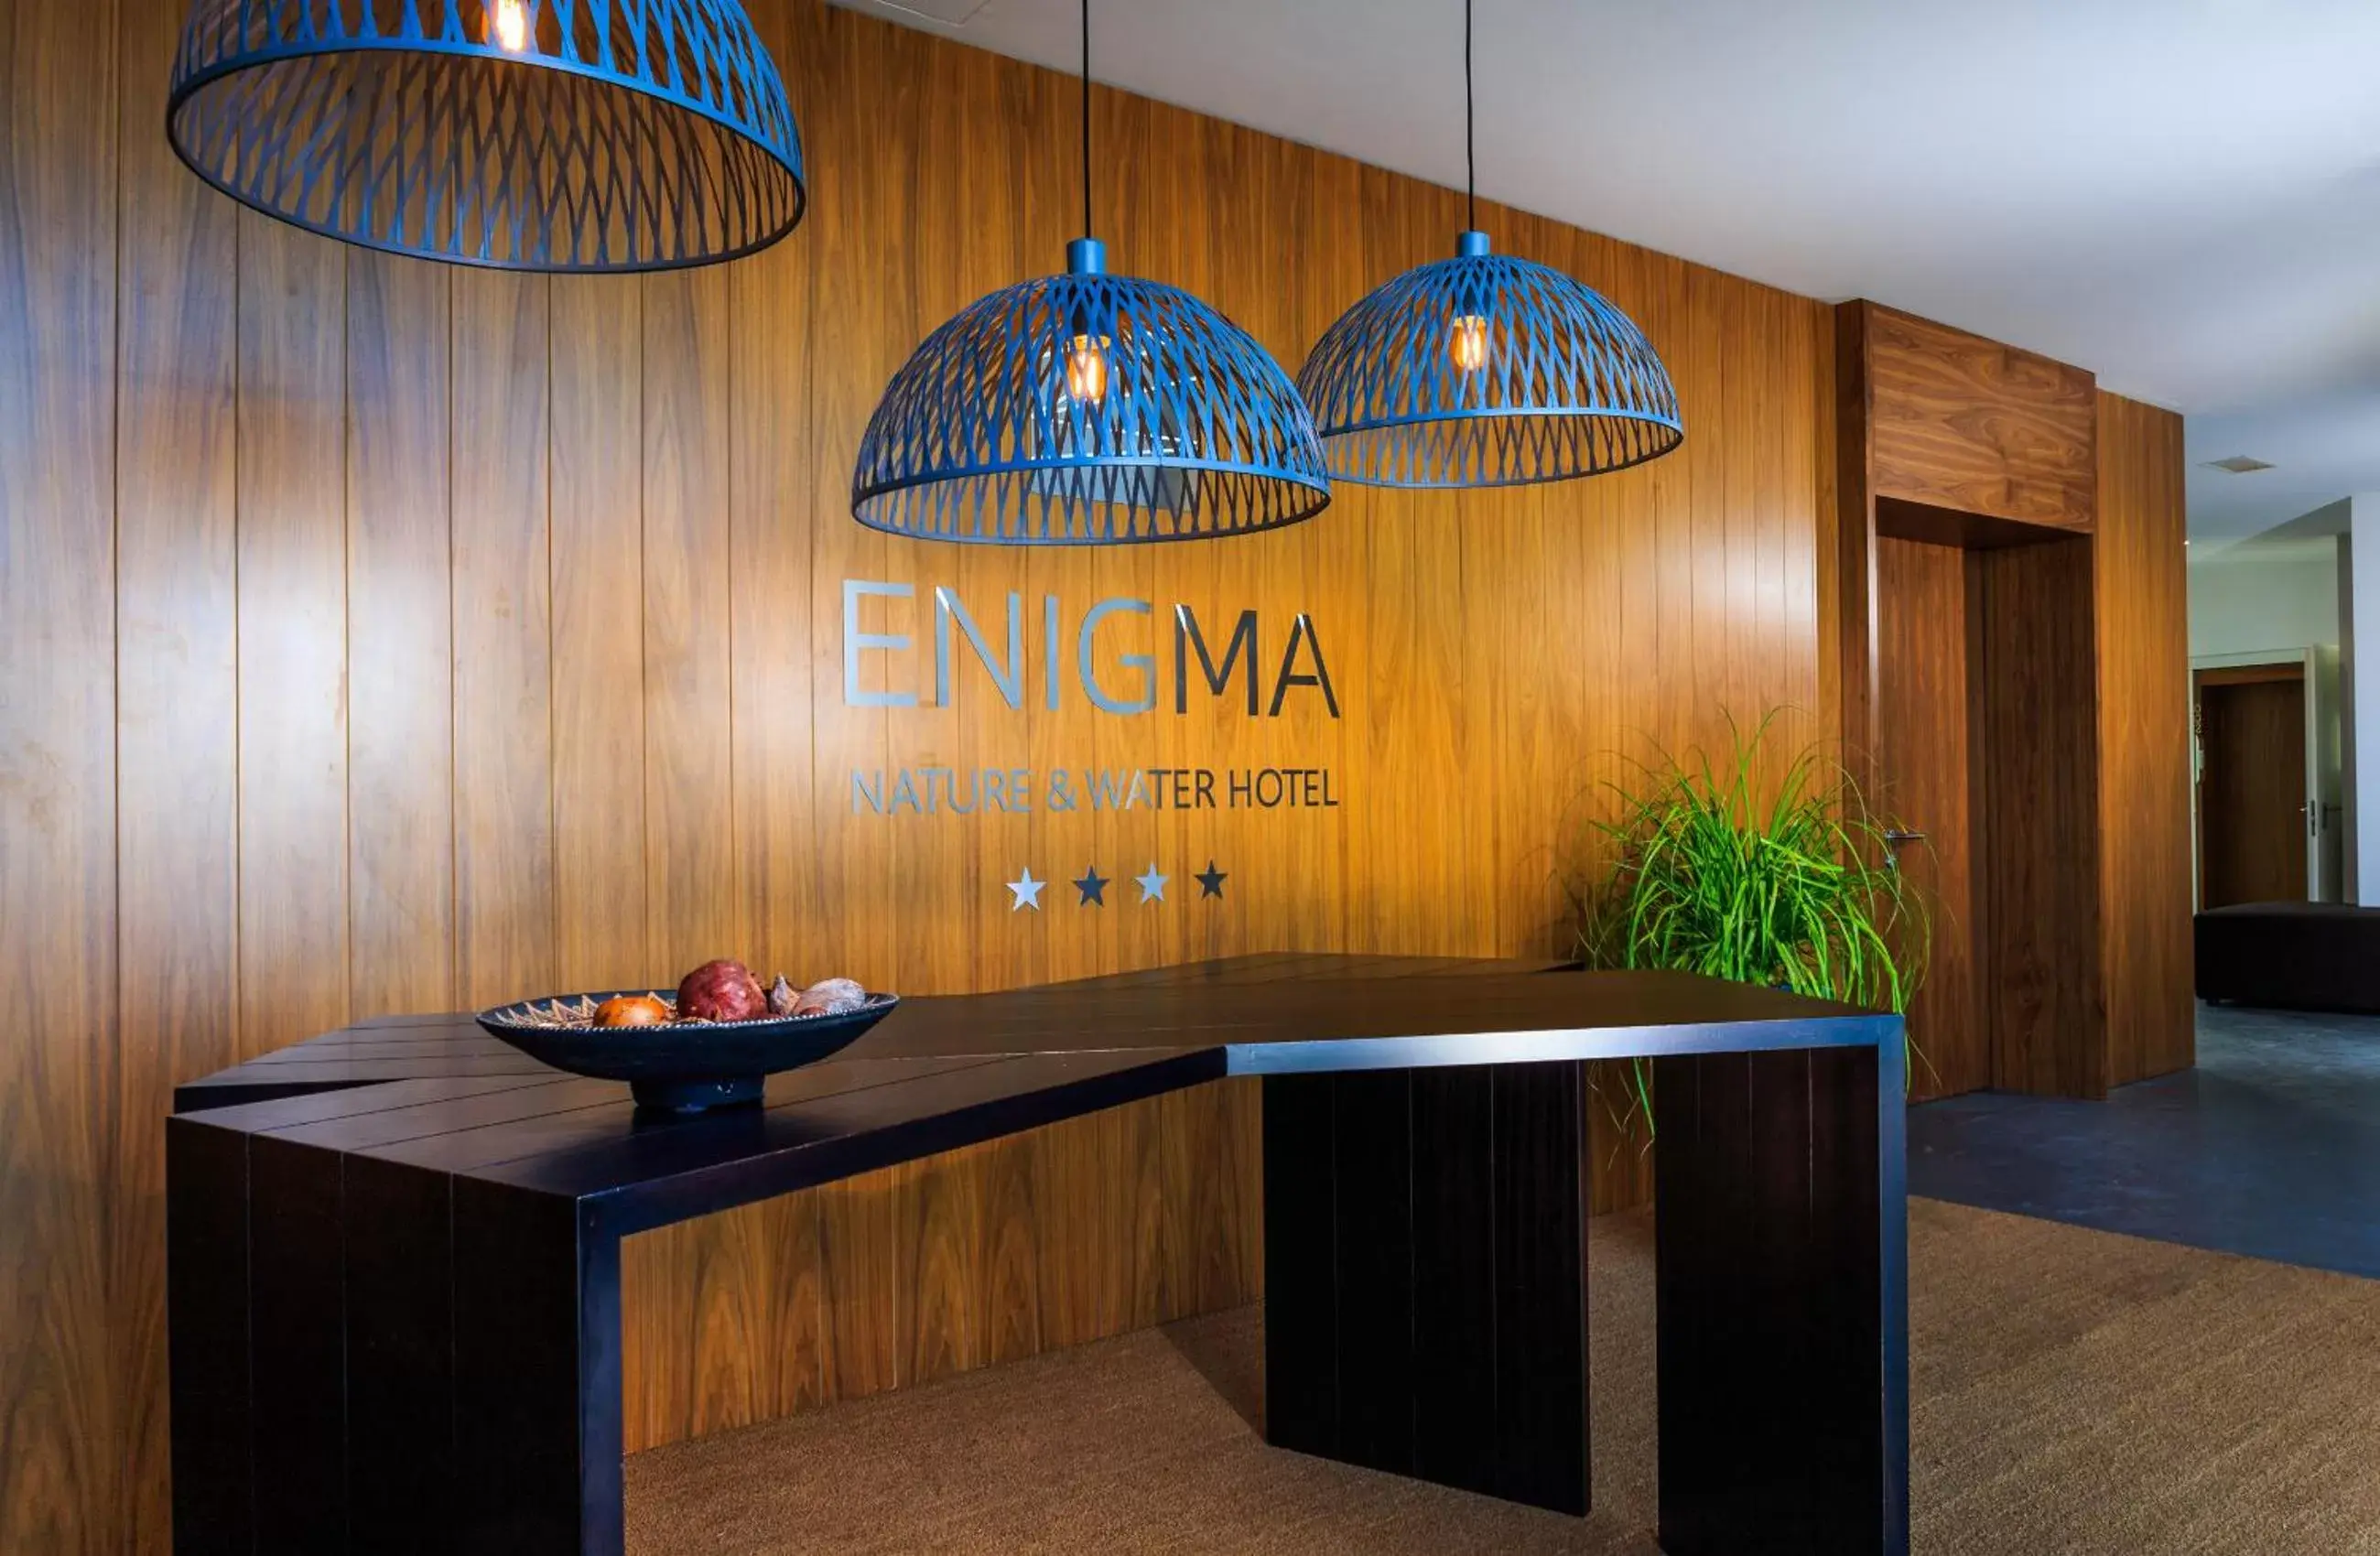 Lobby or reception in Enigma - Nature & Water Hotel